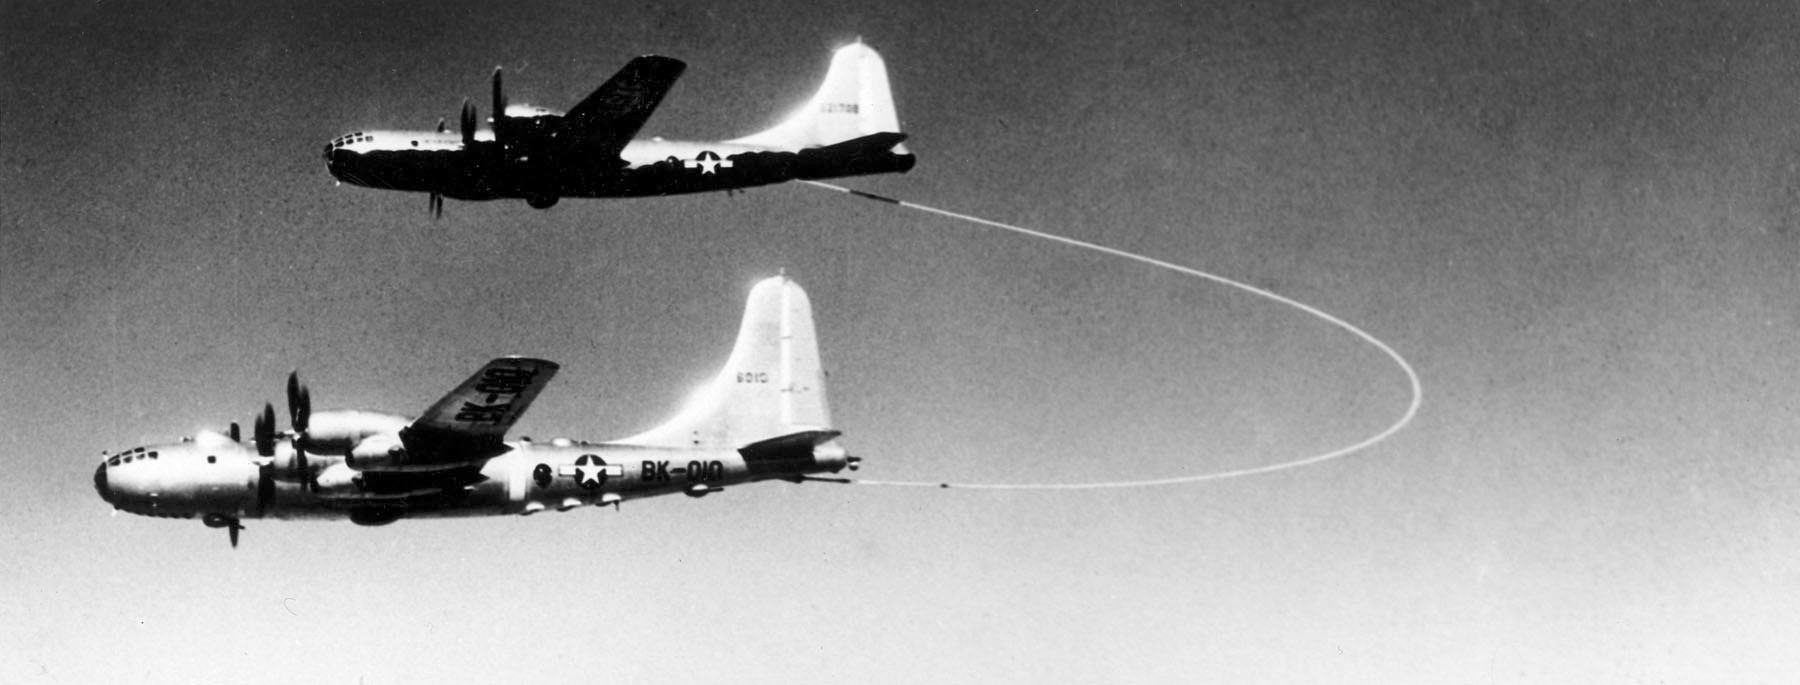 %27Lucky_Lady_II%22_being_refuelled_by_B-29M_45-21708_061215-F-1234S-002.jpg